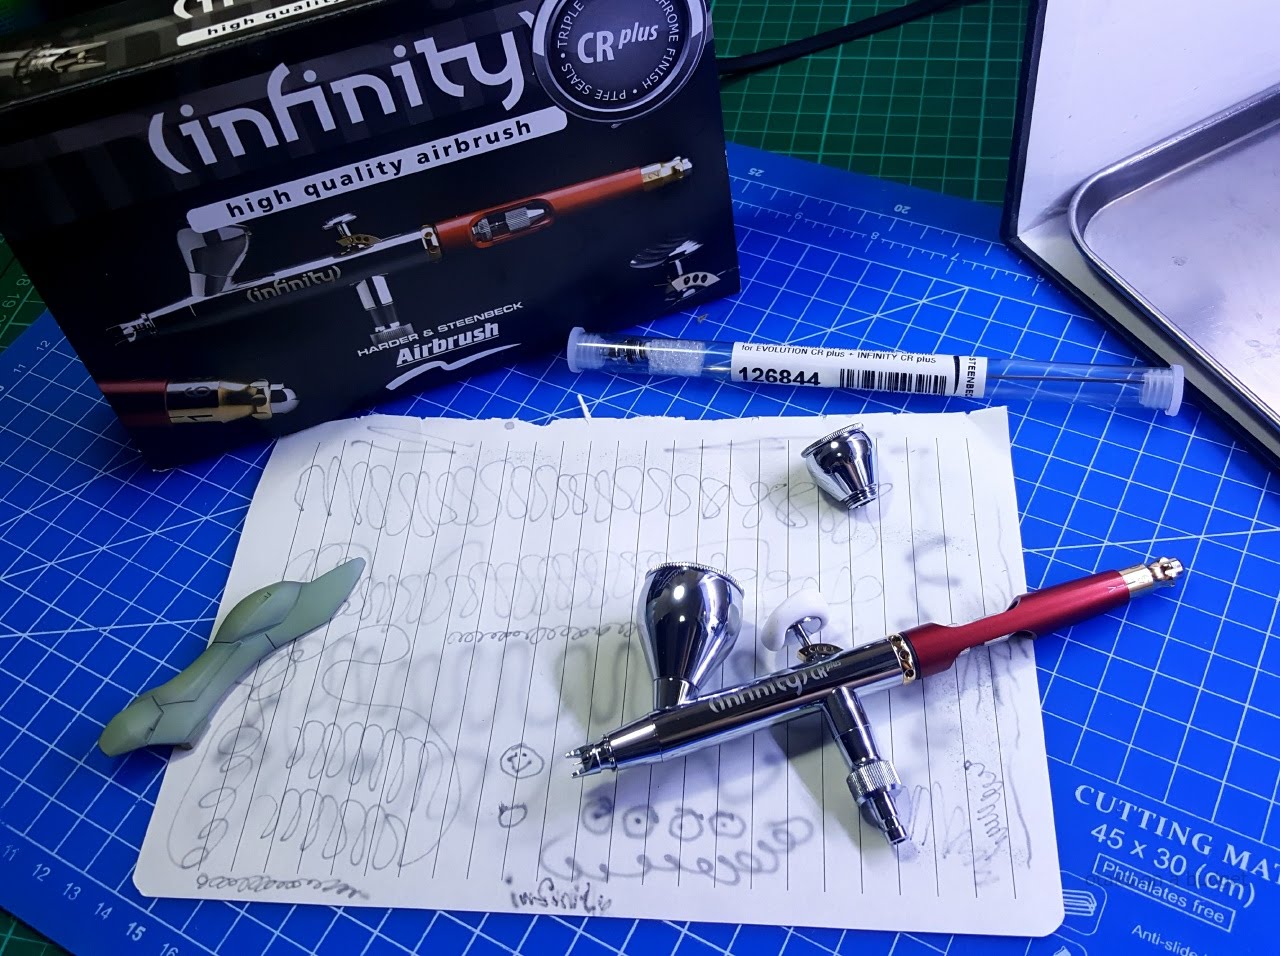 Harder & Steenbeck Infinity CR Plus Review for Miniatures & Models -  FauxHammer